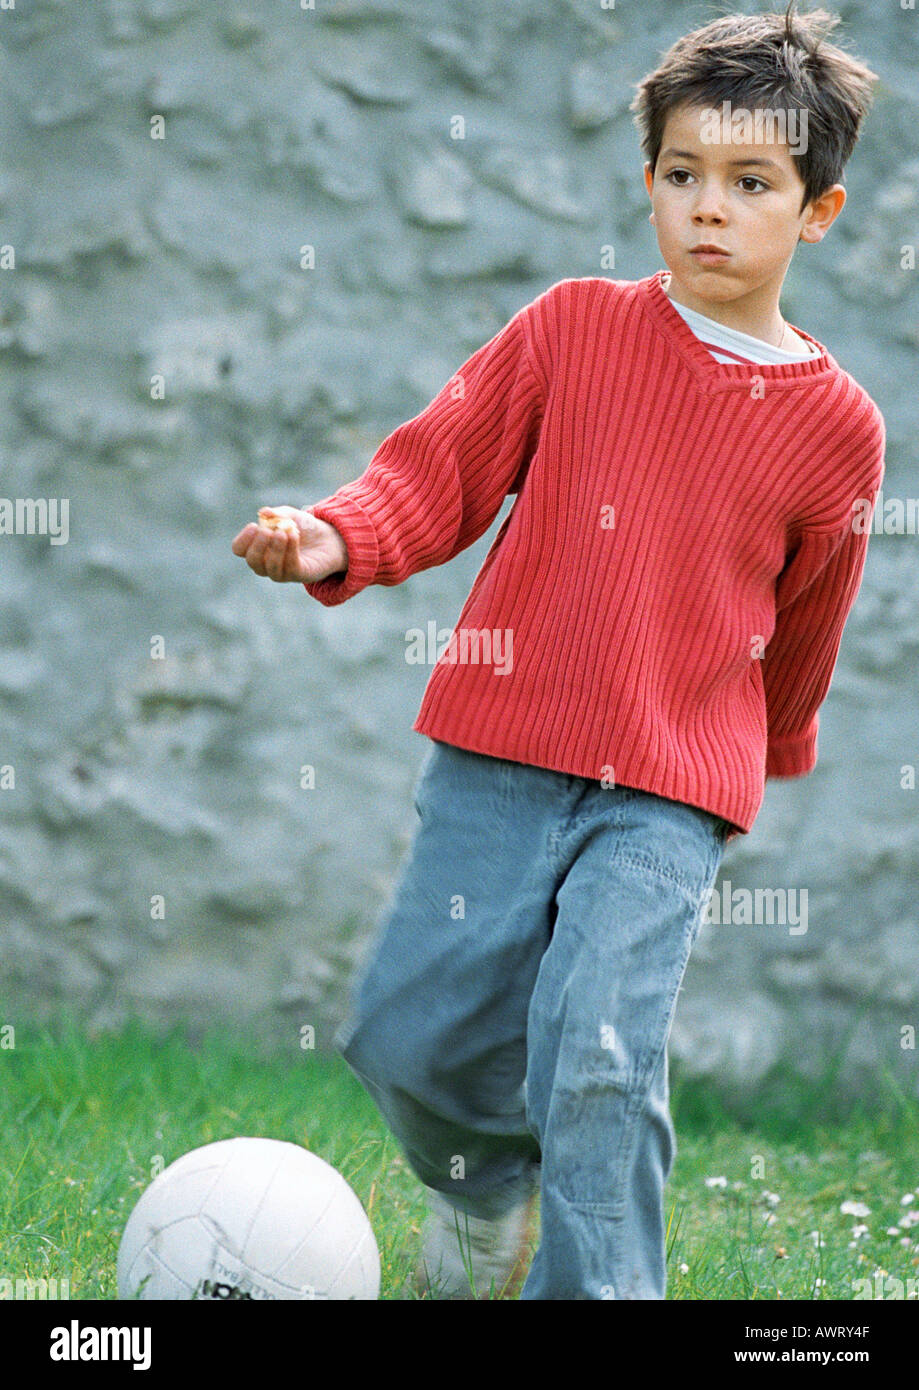 Child playing soccer, full length, close-up Stock Photo